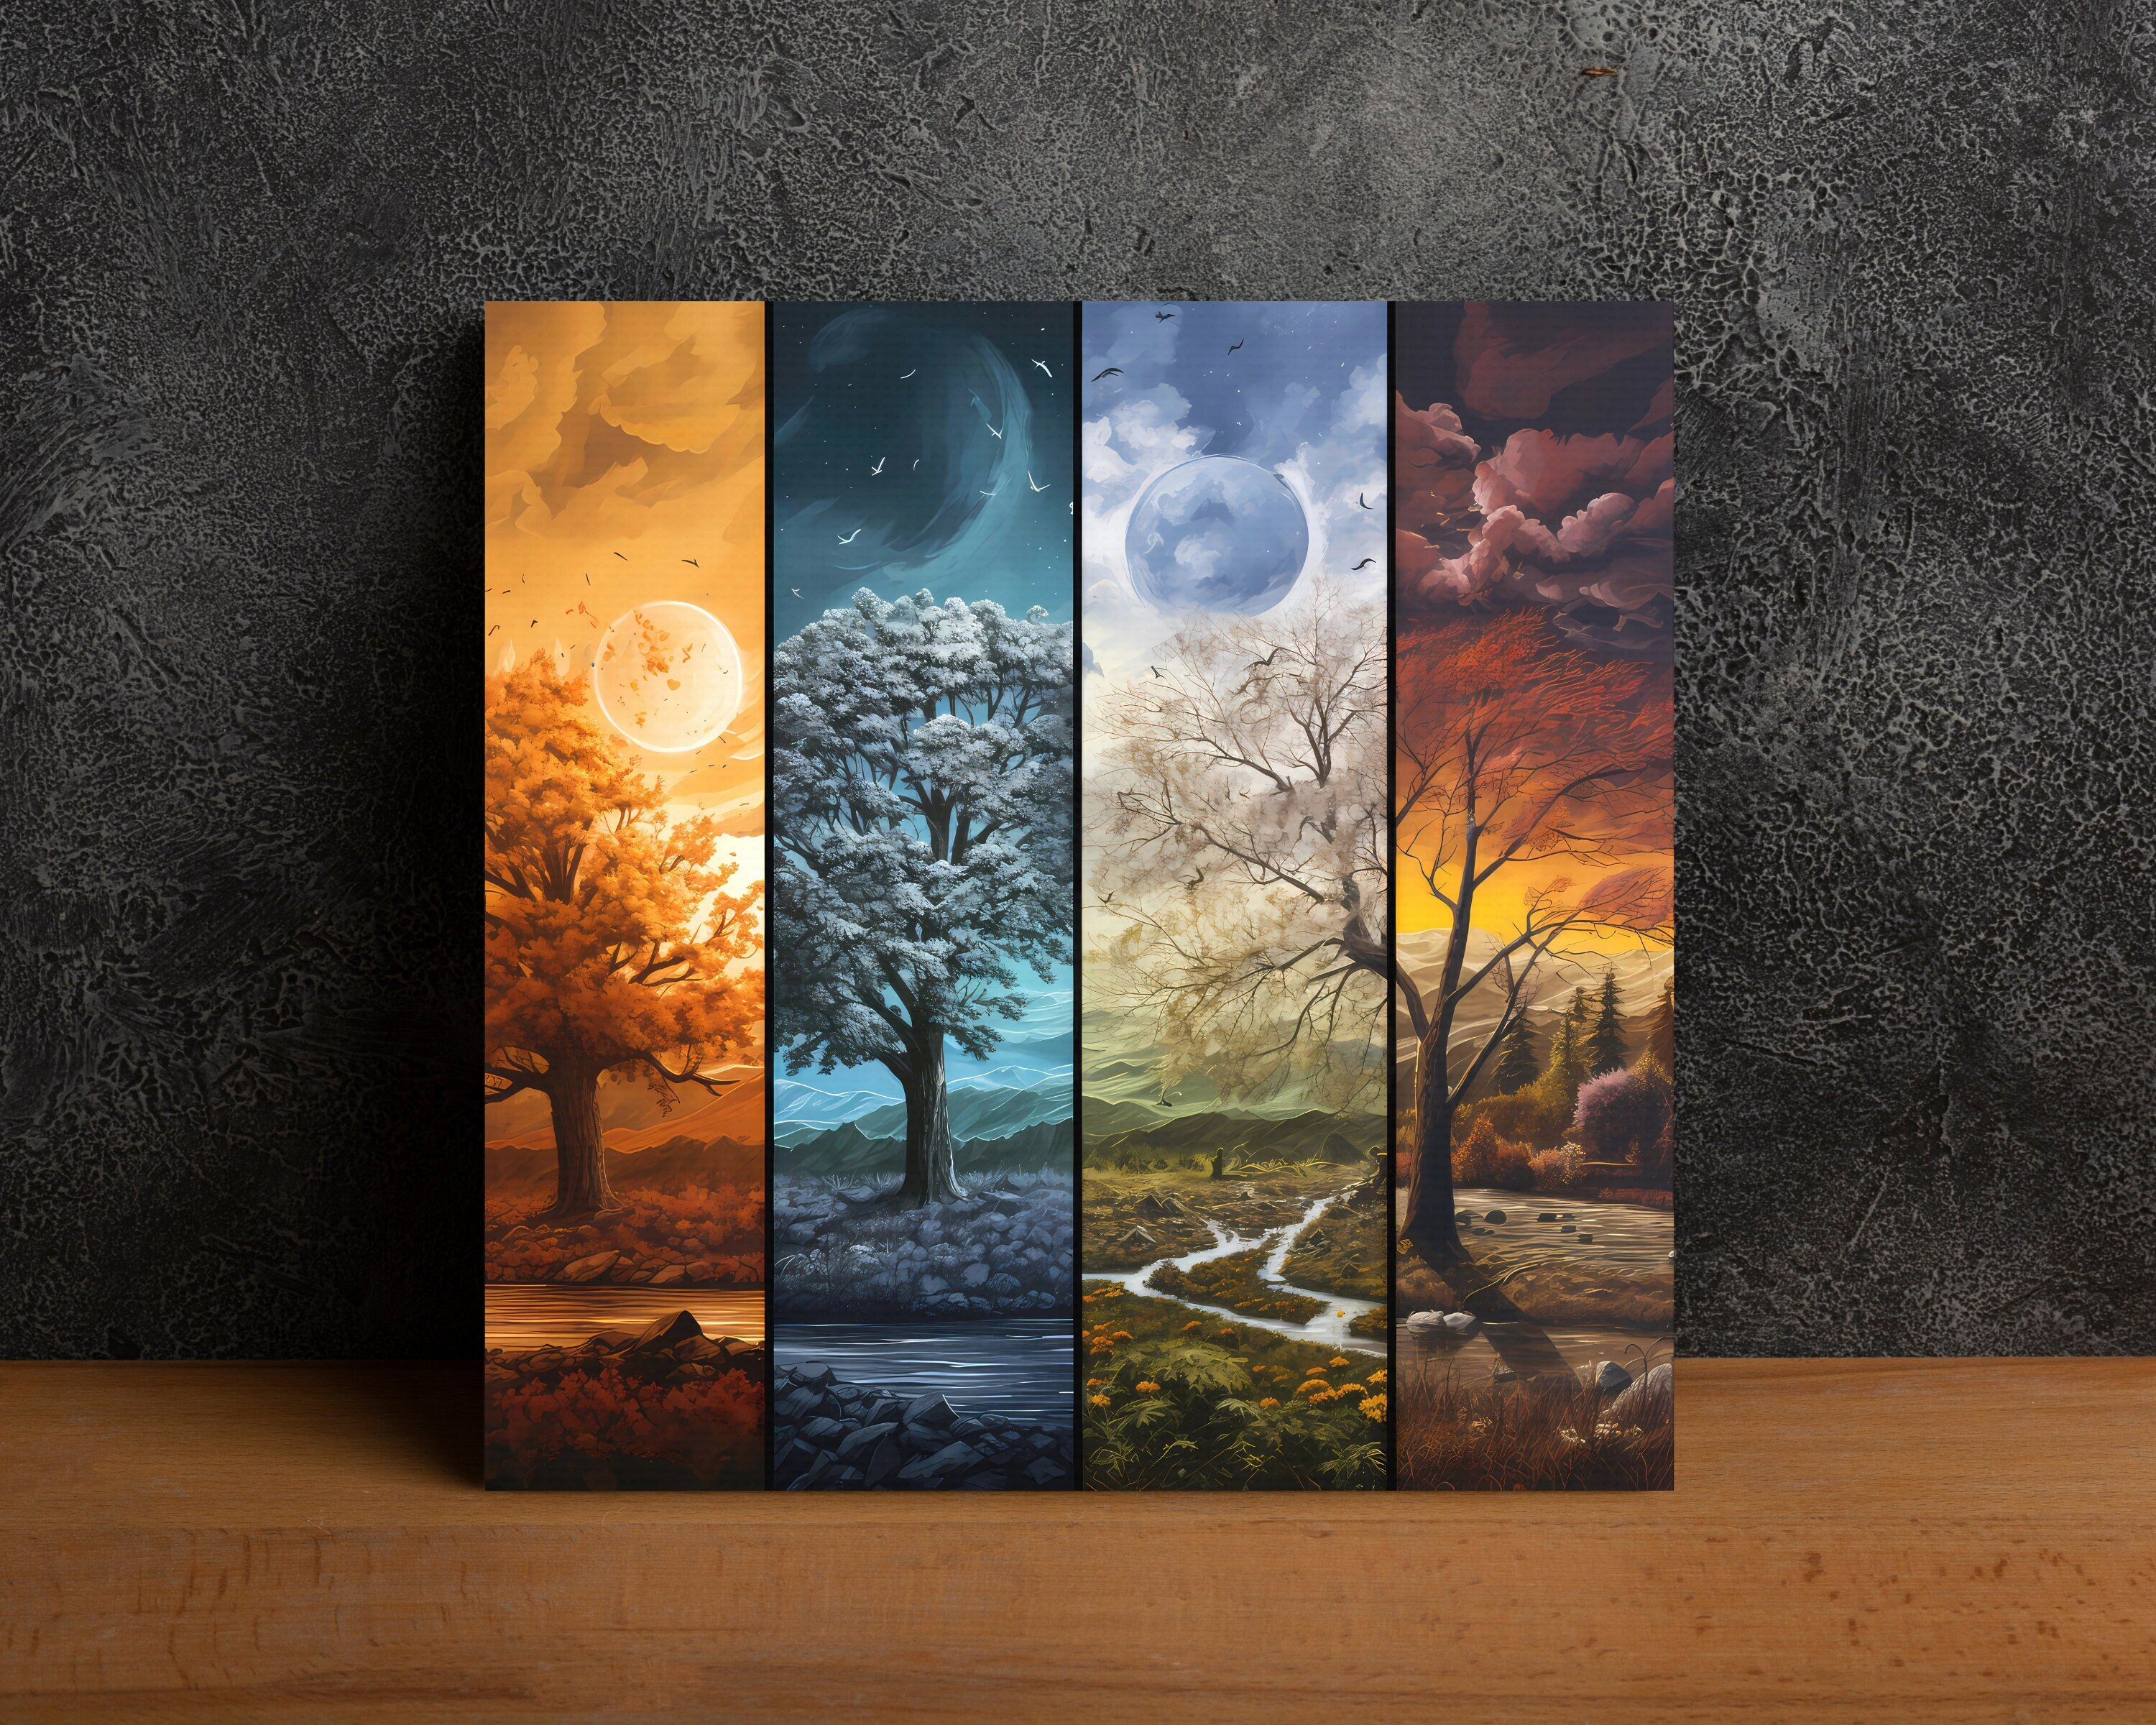  sechars 4 Seasons Colorful Tree Painting Canvas Wall Art  Abstract Spring Summer Autumn Winter Tree with Sunlight Nature Landscape  Picture Artwork for Living Room Bedroom Home Office Decor 24x48: Posters 